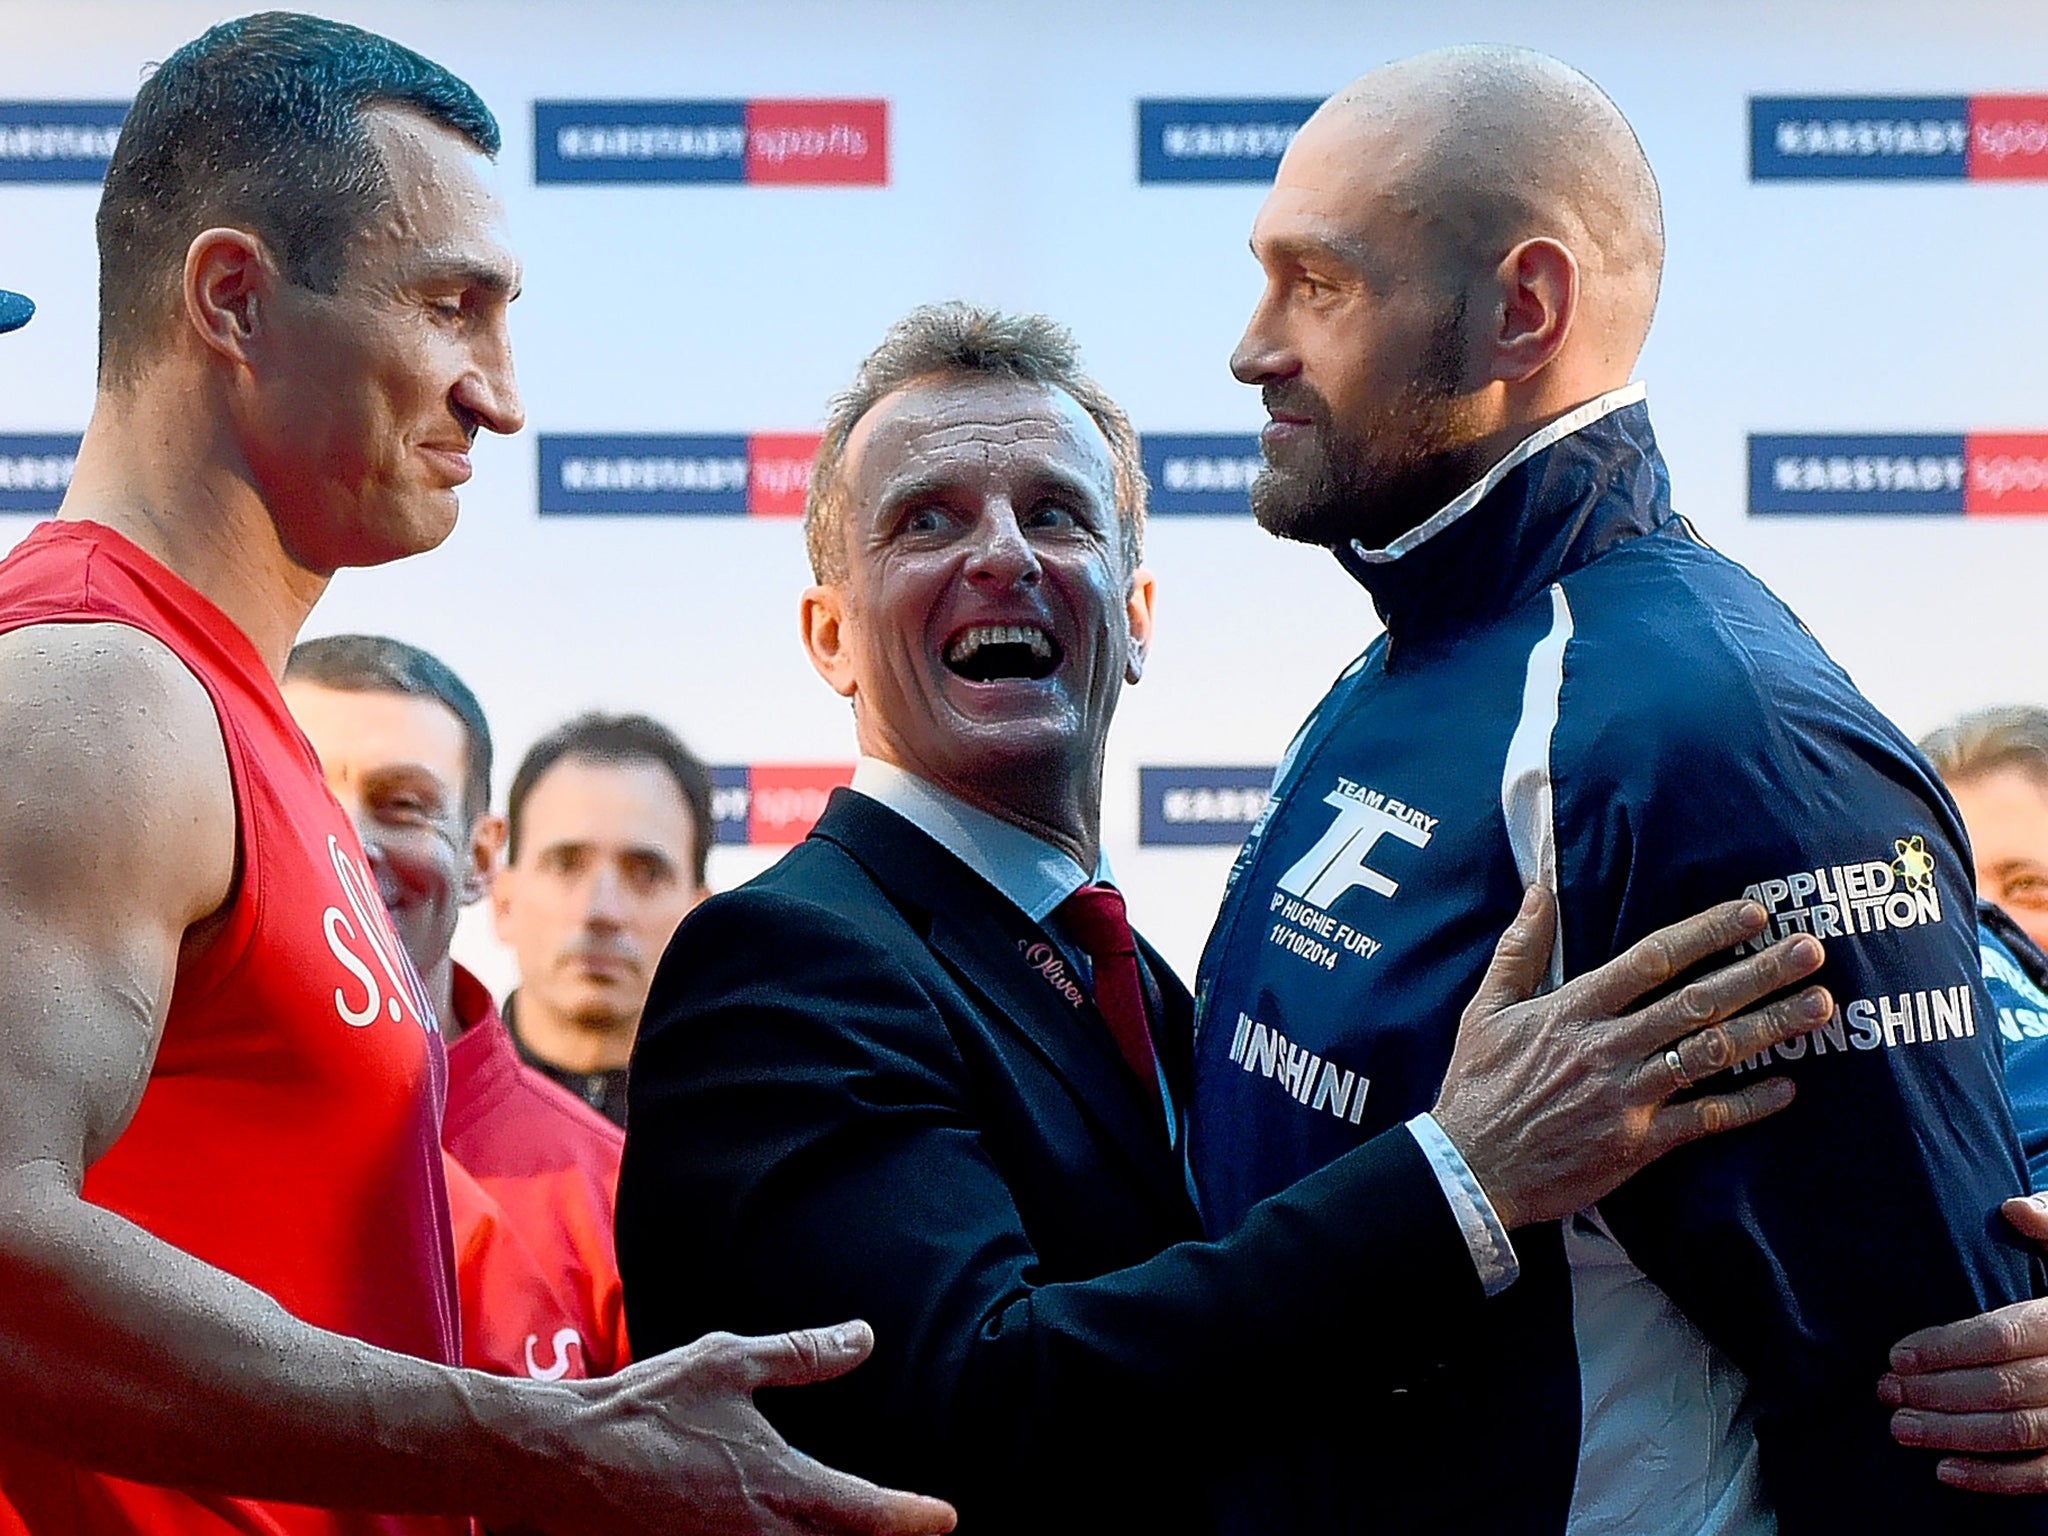 Wladimir Klitschko (left) extends his hand to Tyson Fury during the weigh-in in Germany